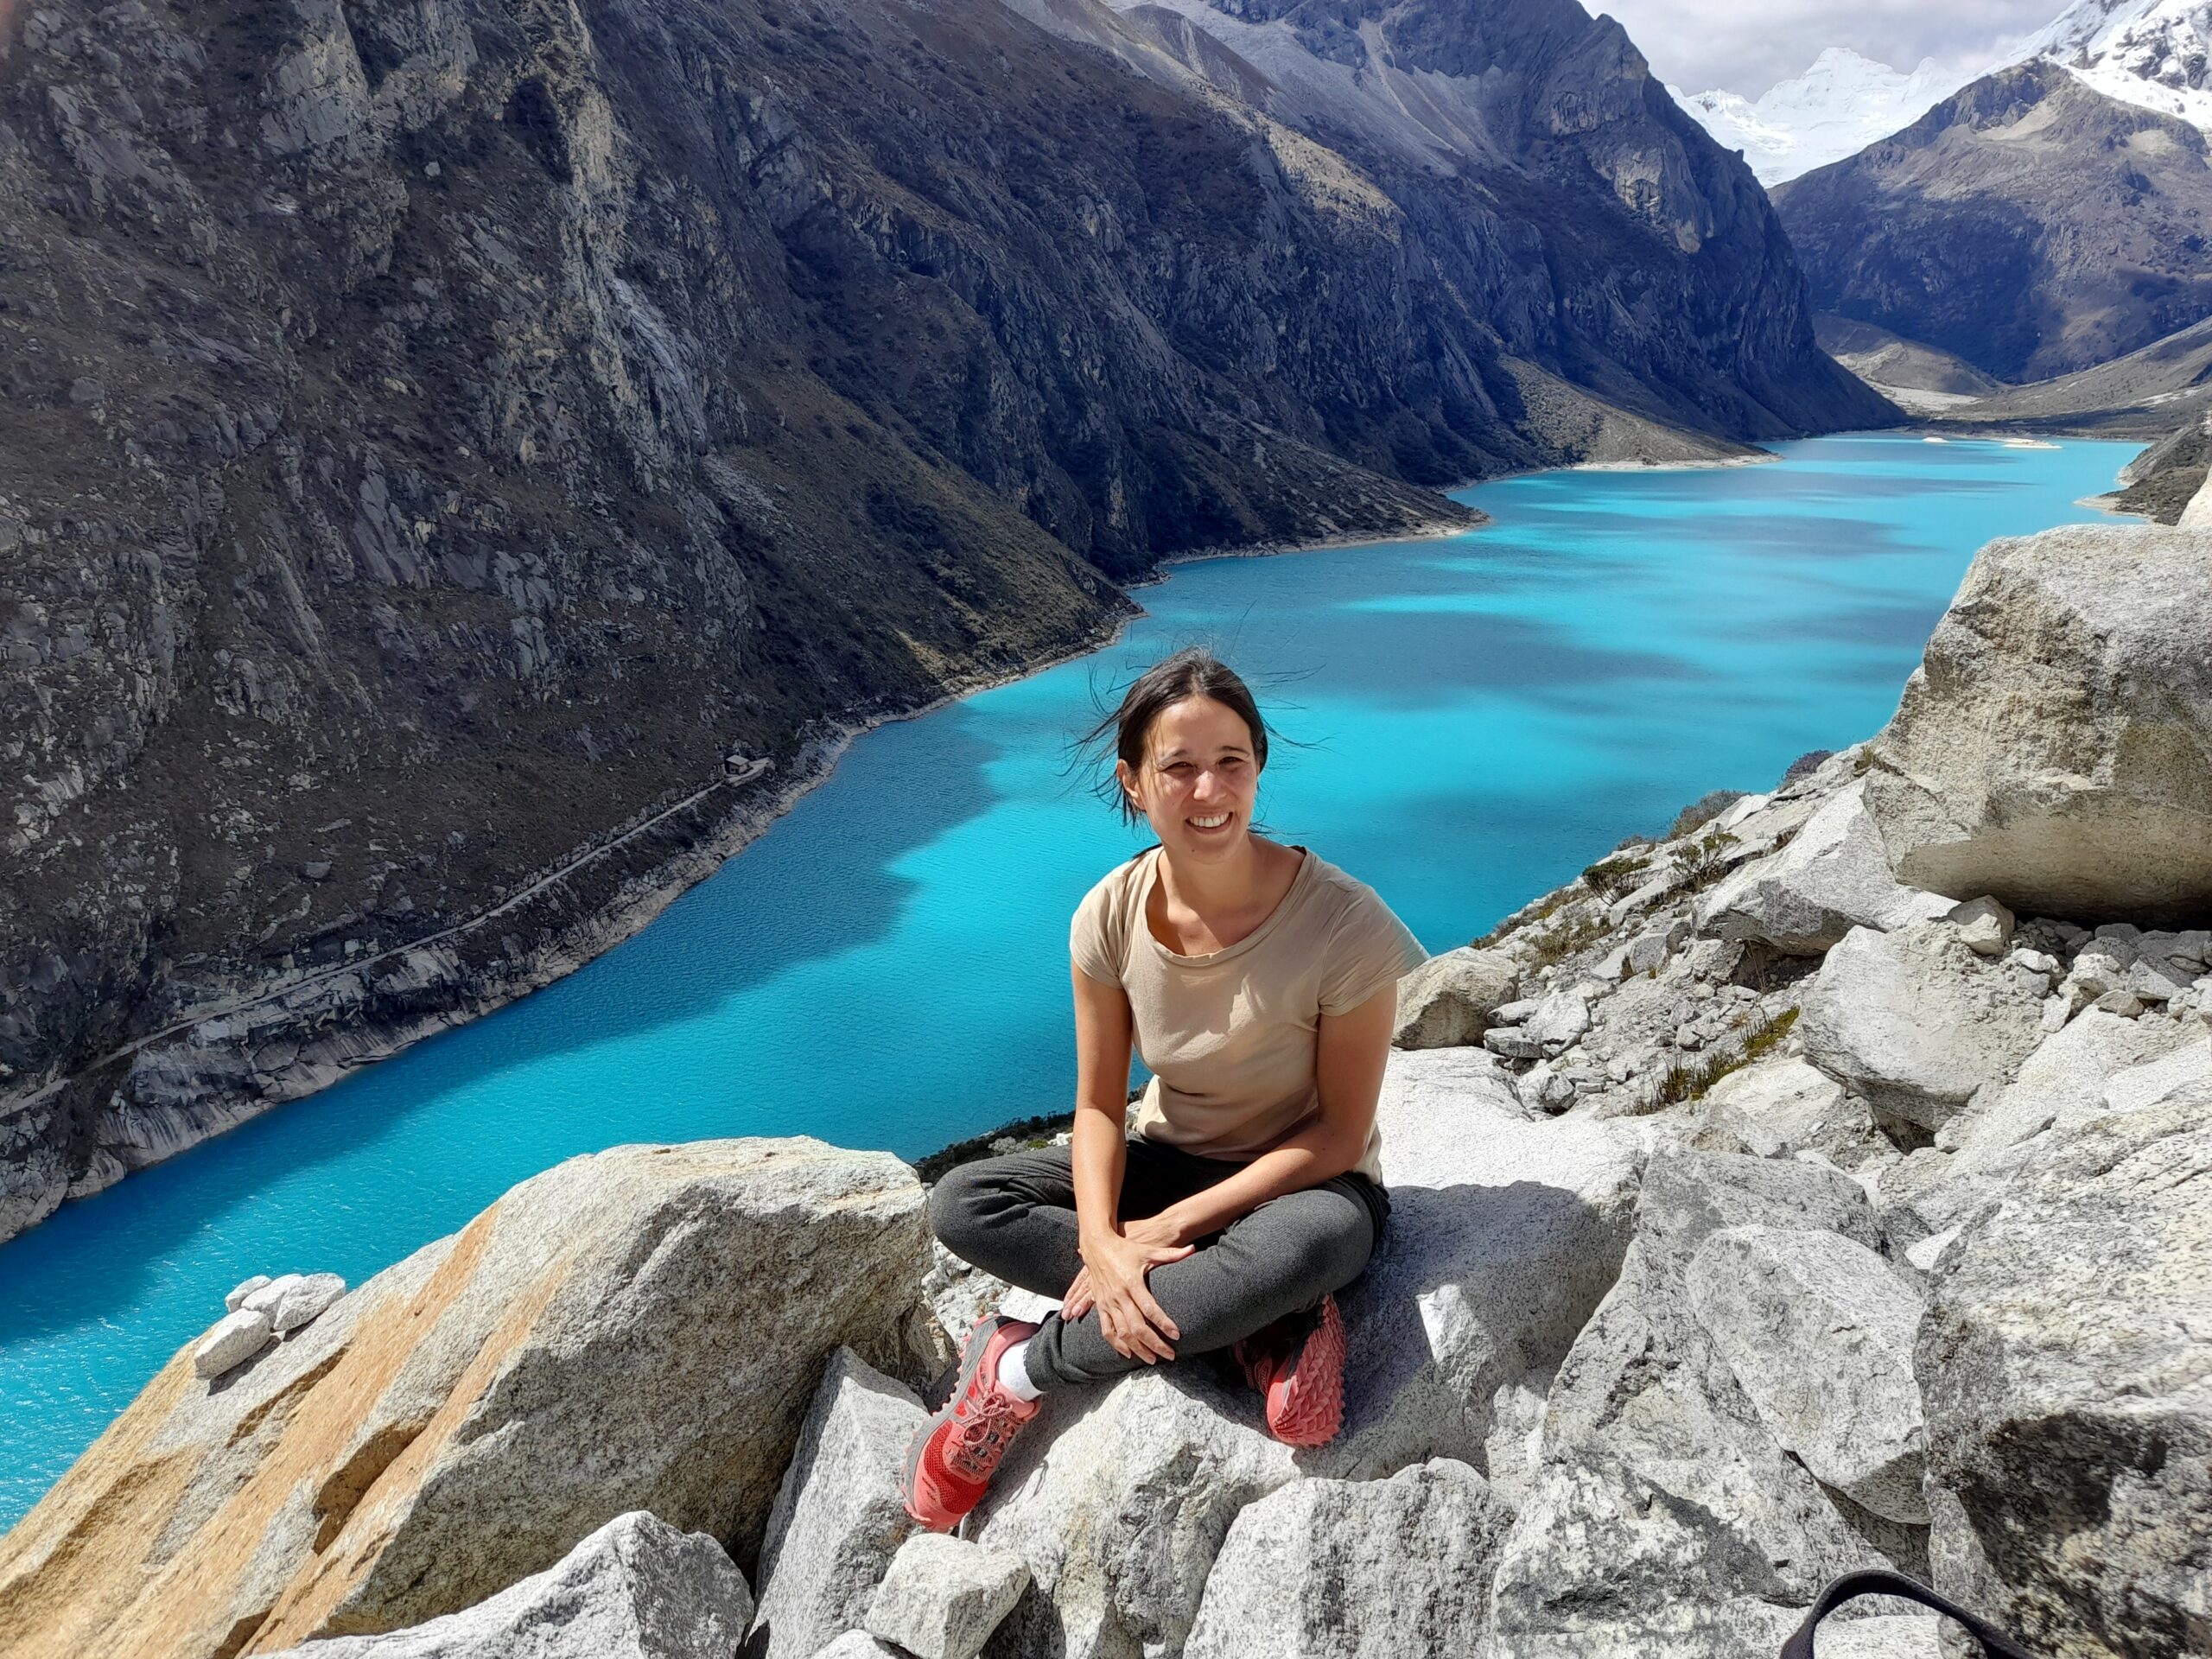 Me sitting at the viewpoint from where you can see the gorgeous turquoise laguna Paron, surrounded by mountains.